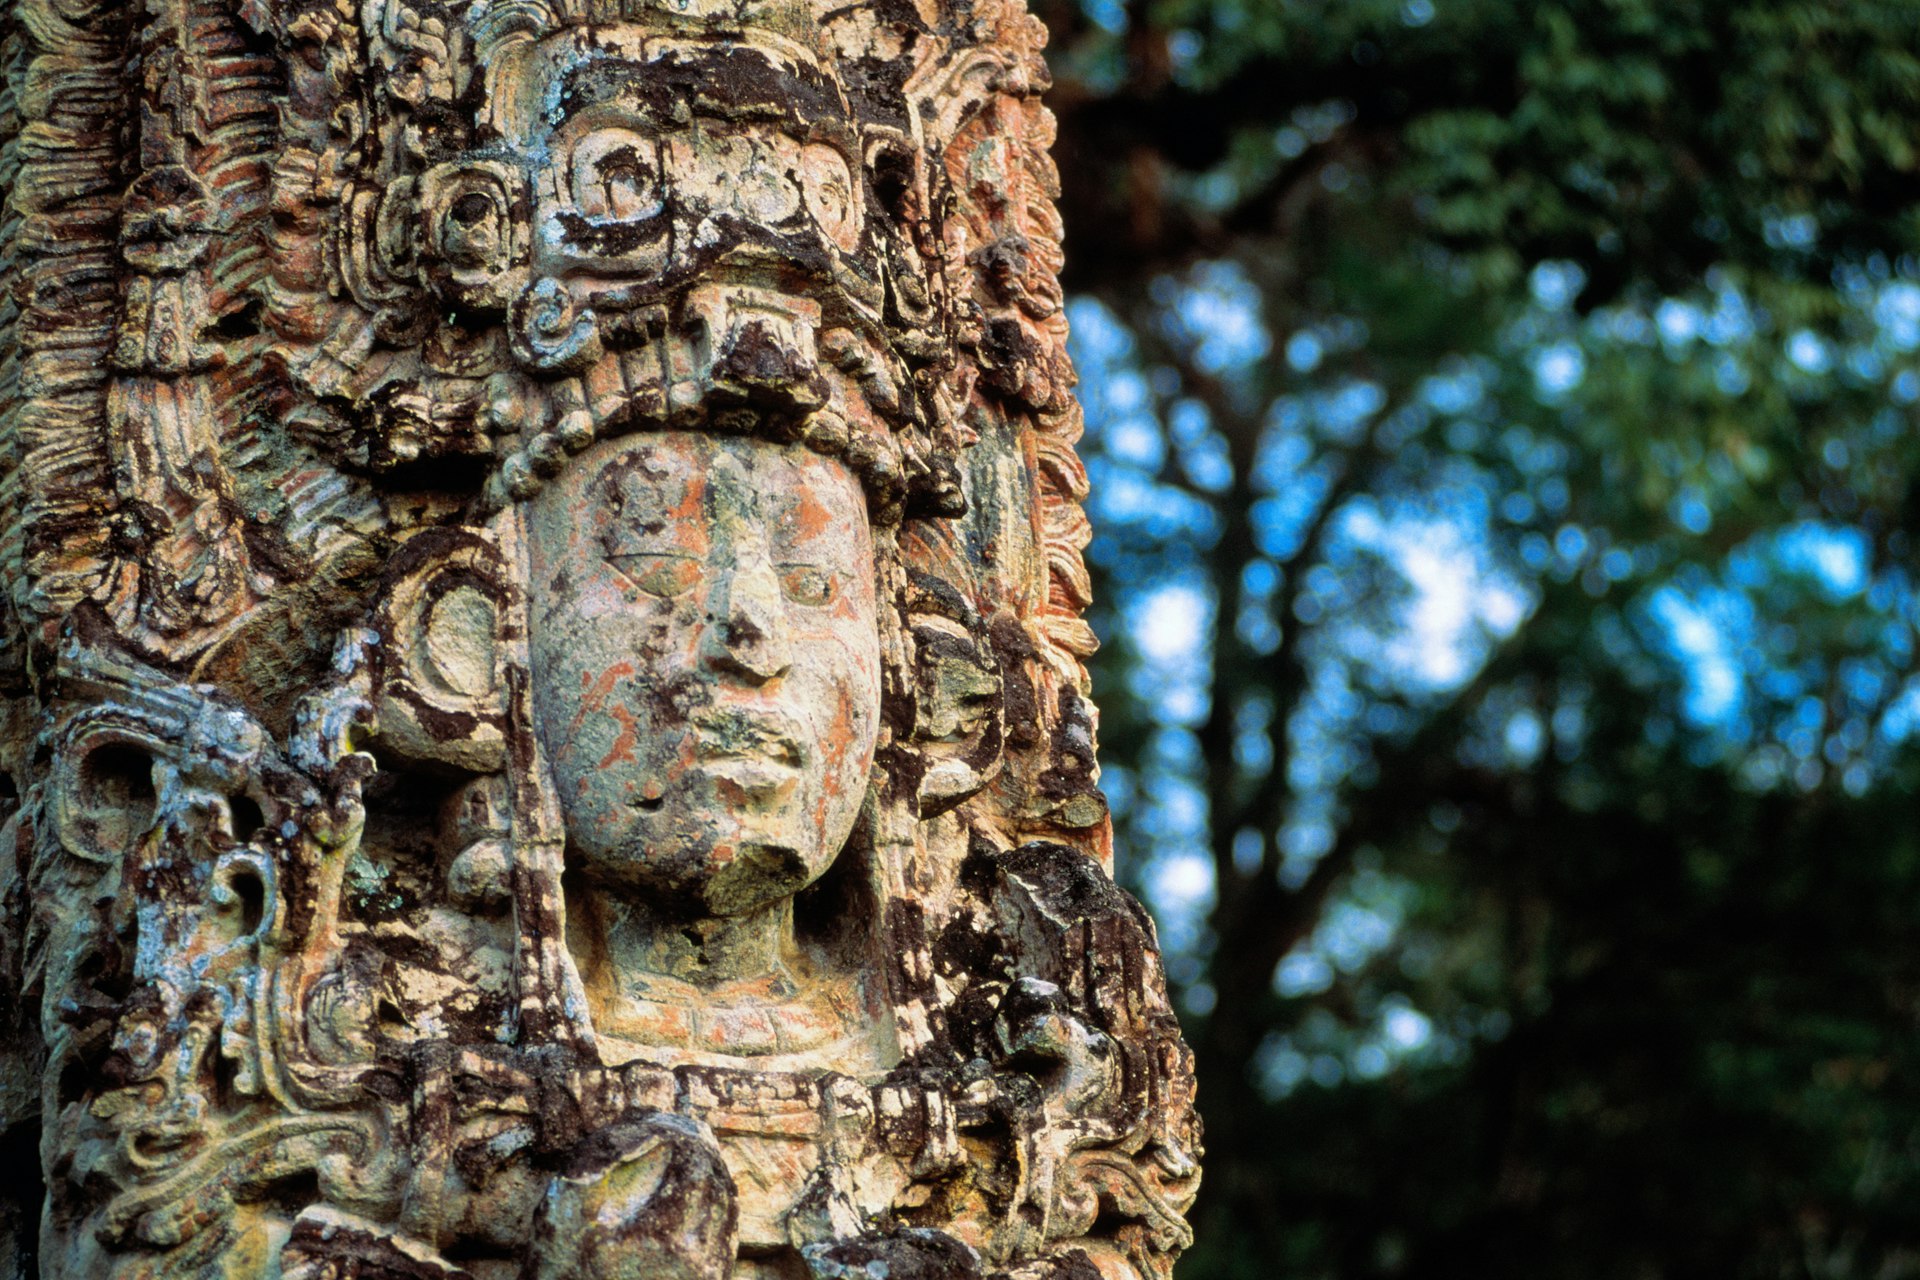 An elaborately carved Mayan sculpture at the archaeological site of Copán, Honduras, Central America